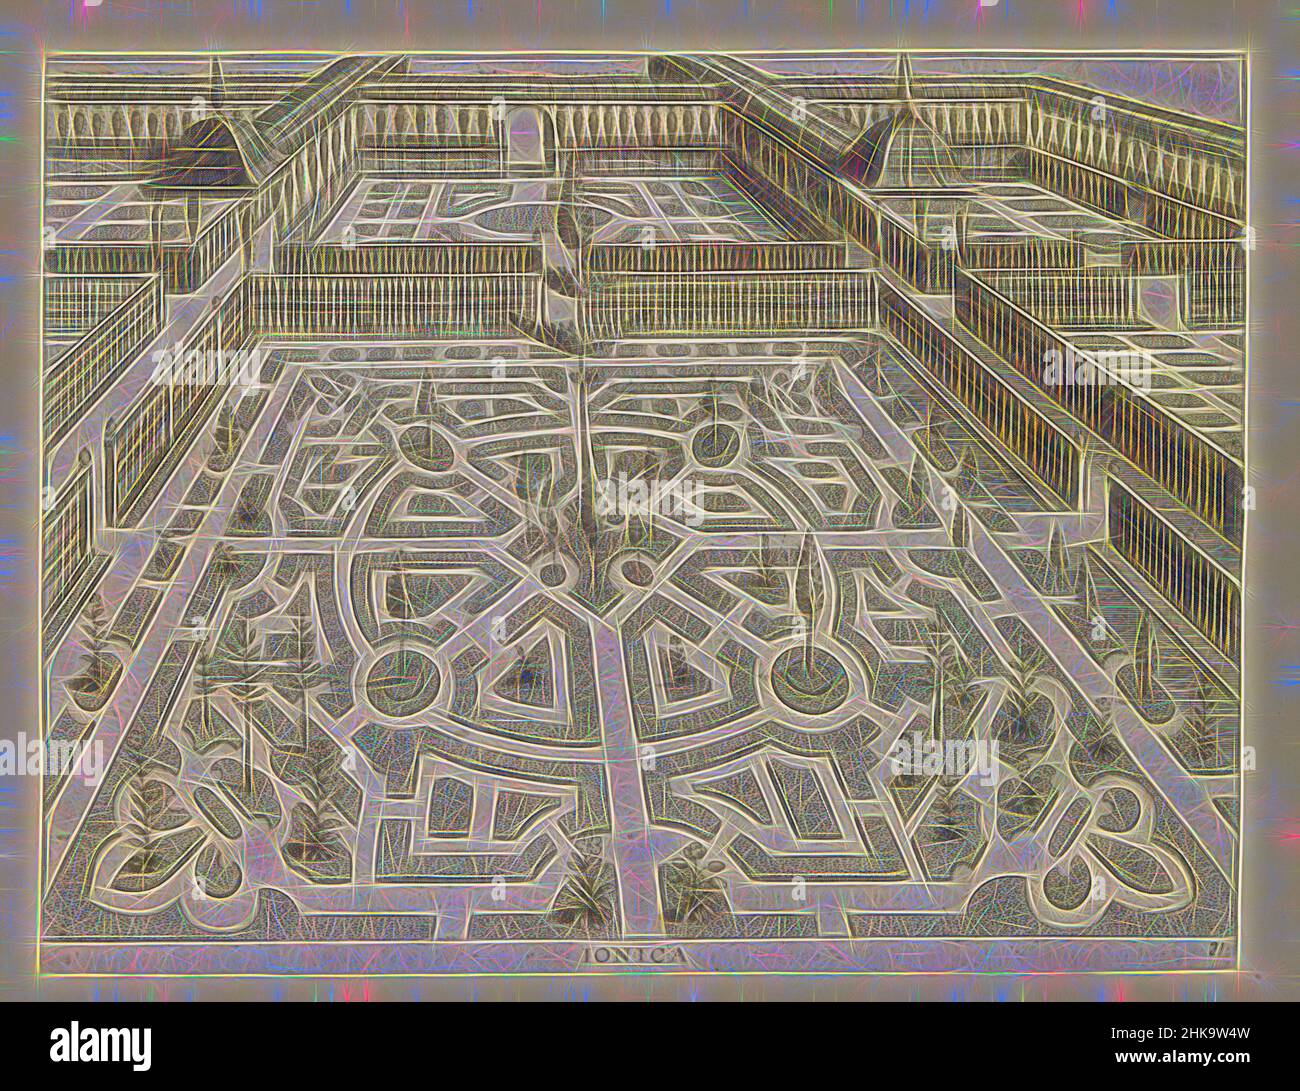 Inspired by Garden with a parterre with in the corners fleurs de lis, Ionica, Hortorum Viridariorumque elegantes et multiplicis formae, Garden designs associated with the Doric, Ionic and Corinthian building orders, Garden with a parterre with in the corners fleurs de lis. The garden is laid out, Reimagined by Artotop. Classic art reinvented with a modern twist. Design of warm cheerful glowing of brightness and light ray radiance. Photography inspired by surrealism and futurism, embracing dynamic energy of modern technology, movement, speed and revolutionize culture Stock Photo